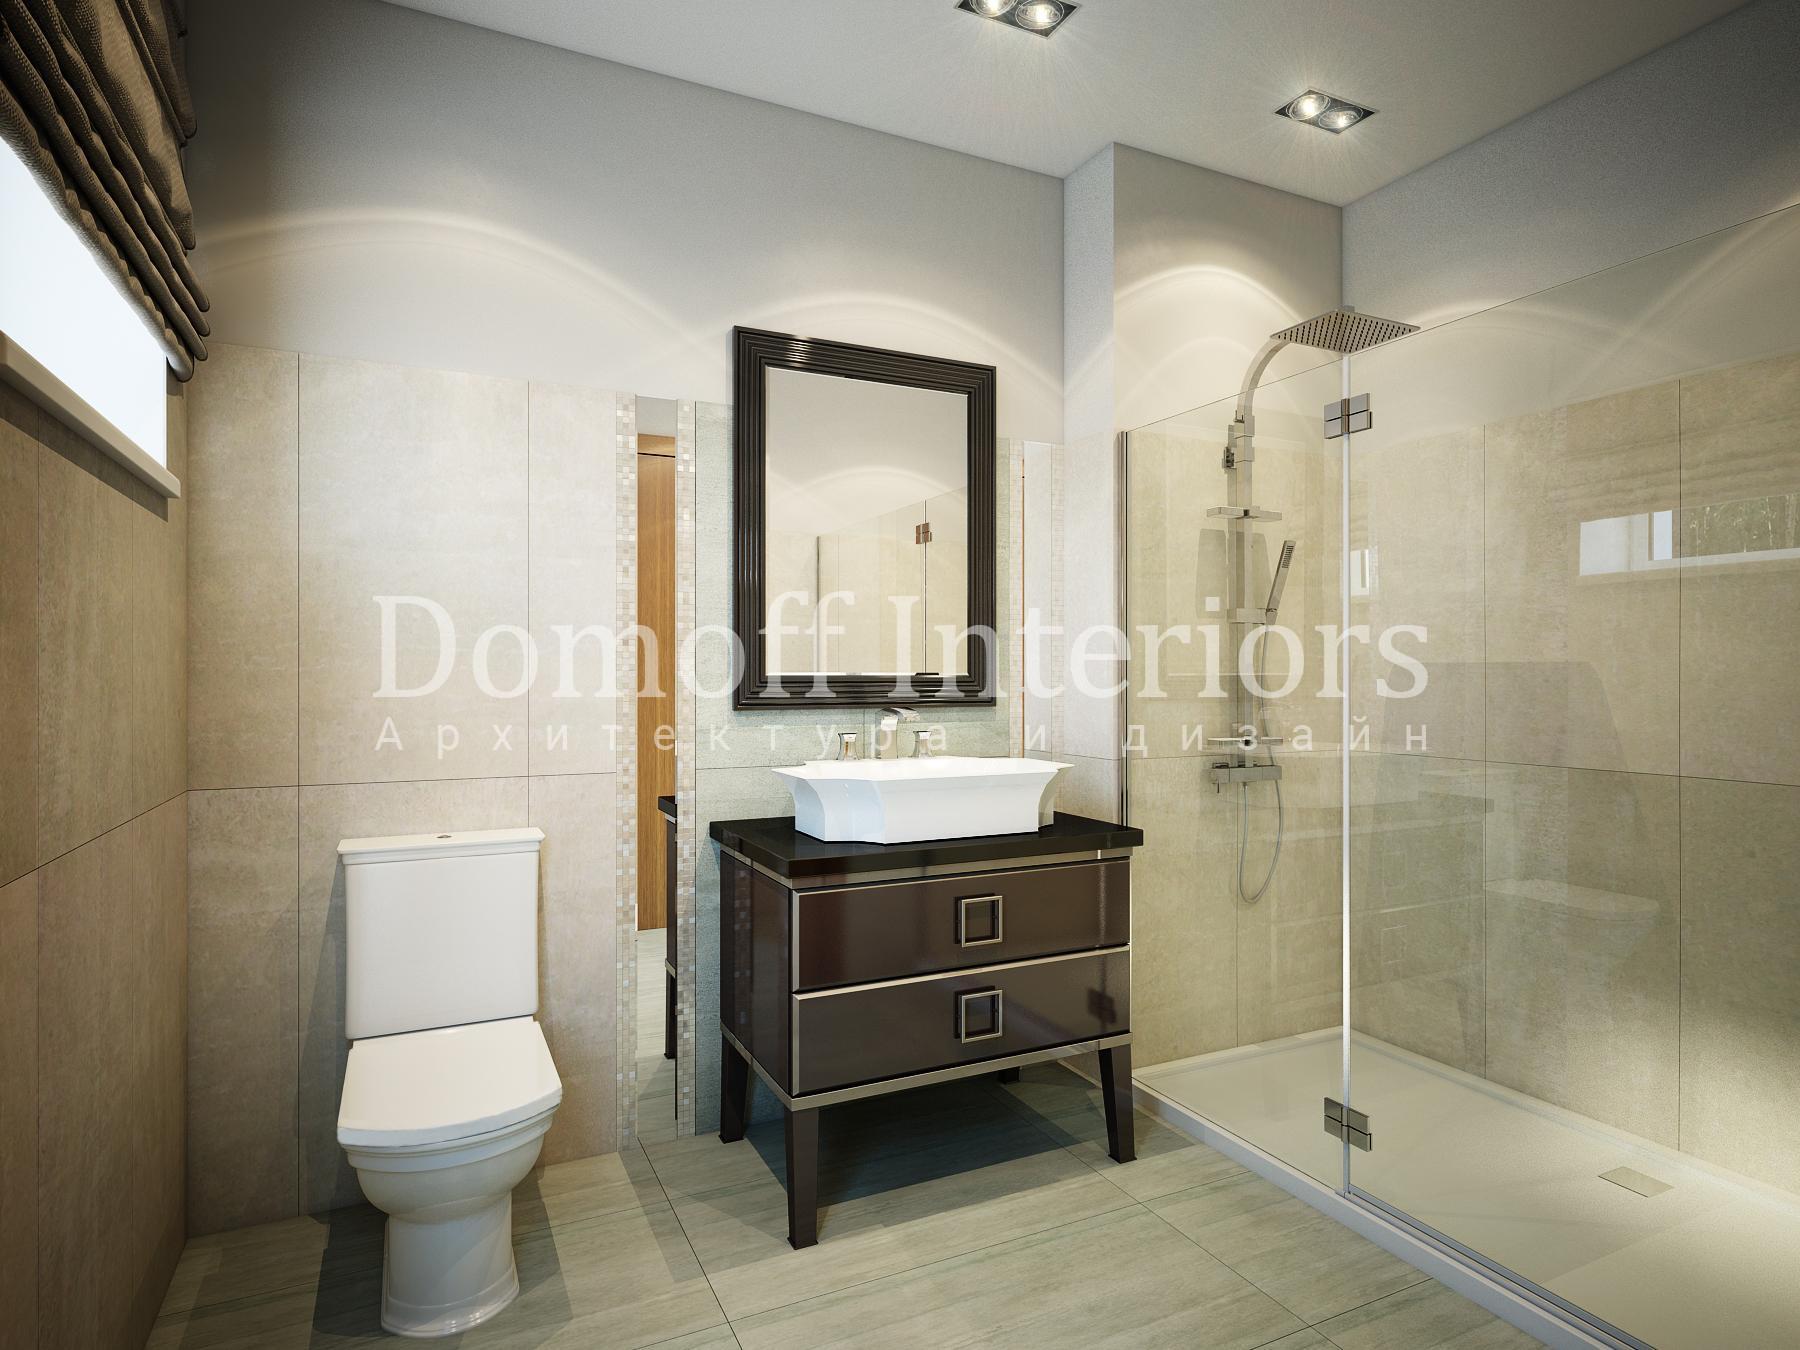 Master bathroom made in the style of Contemporary